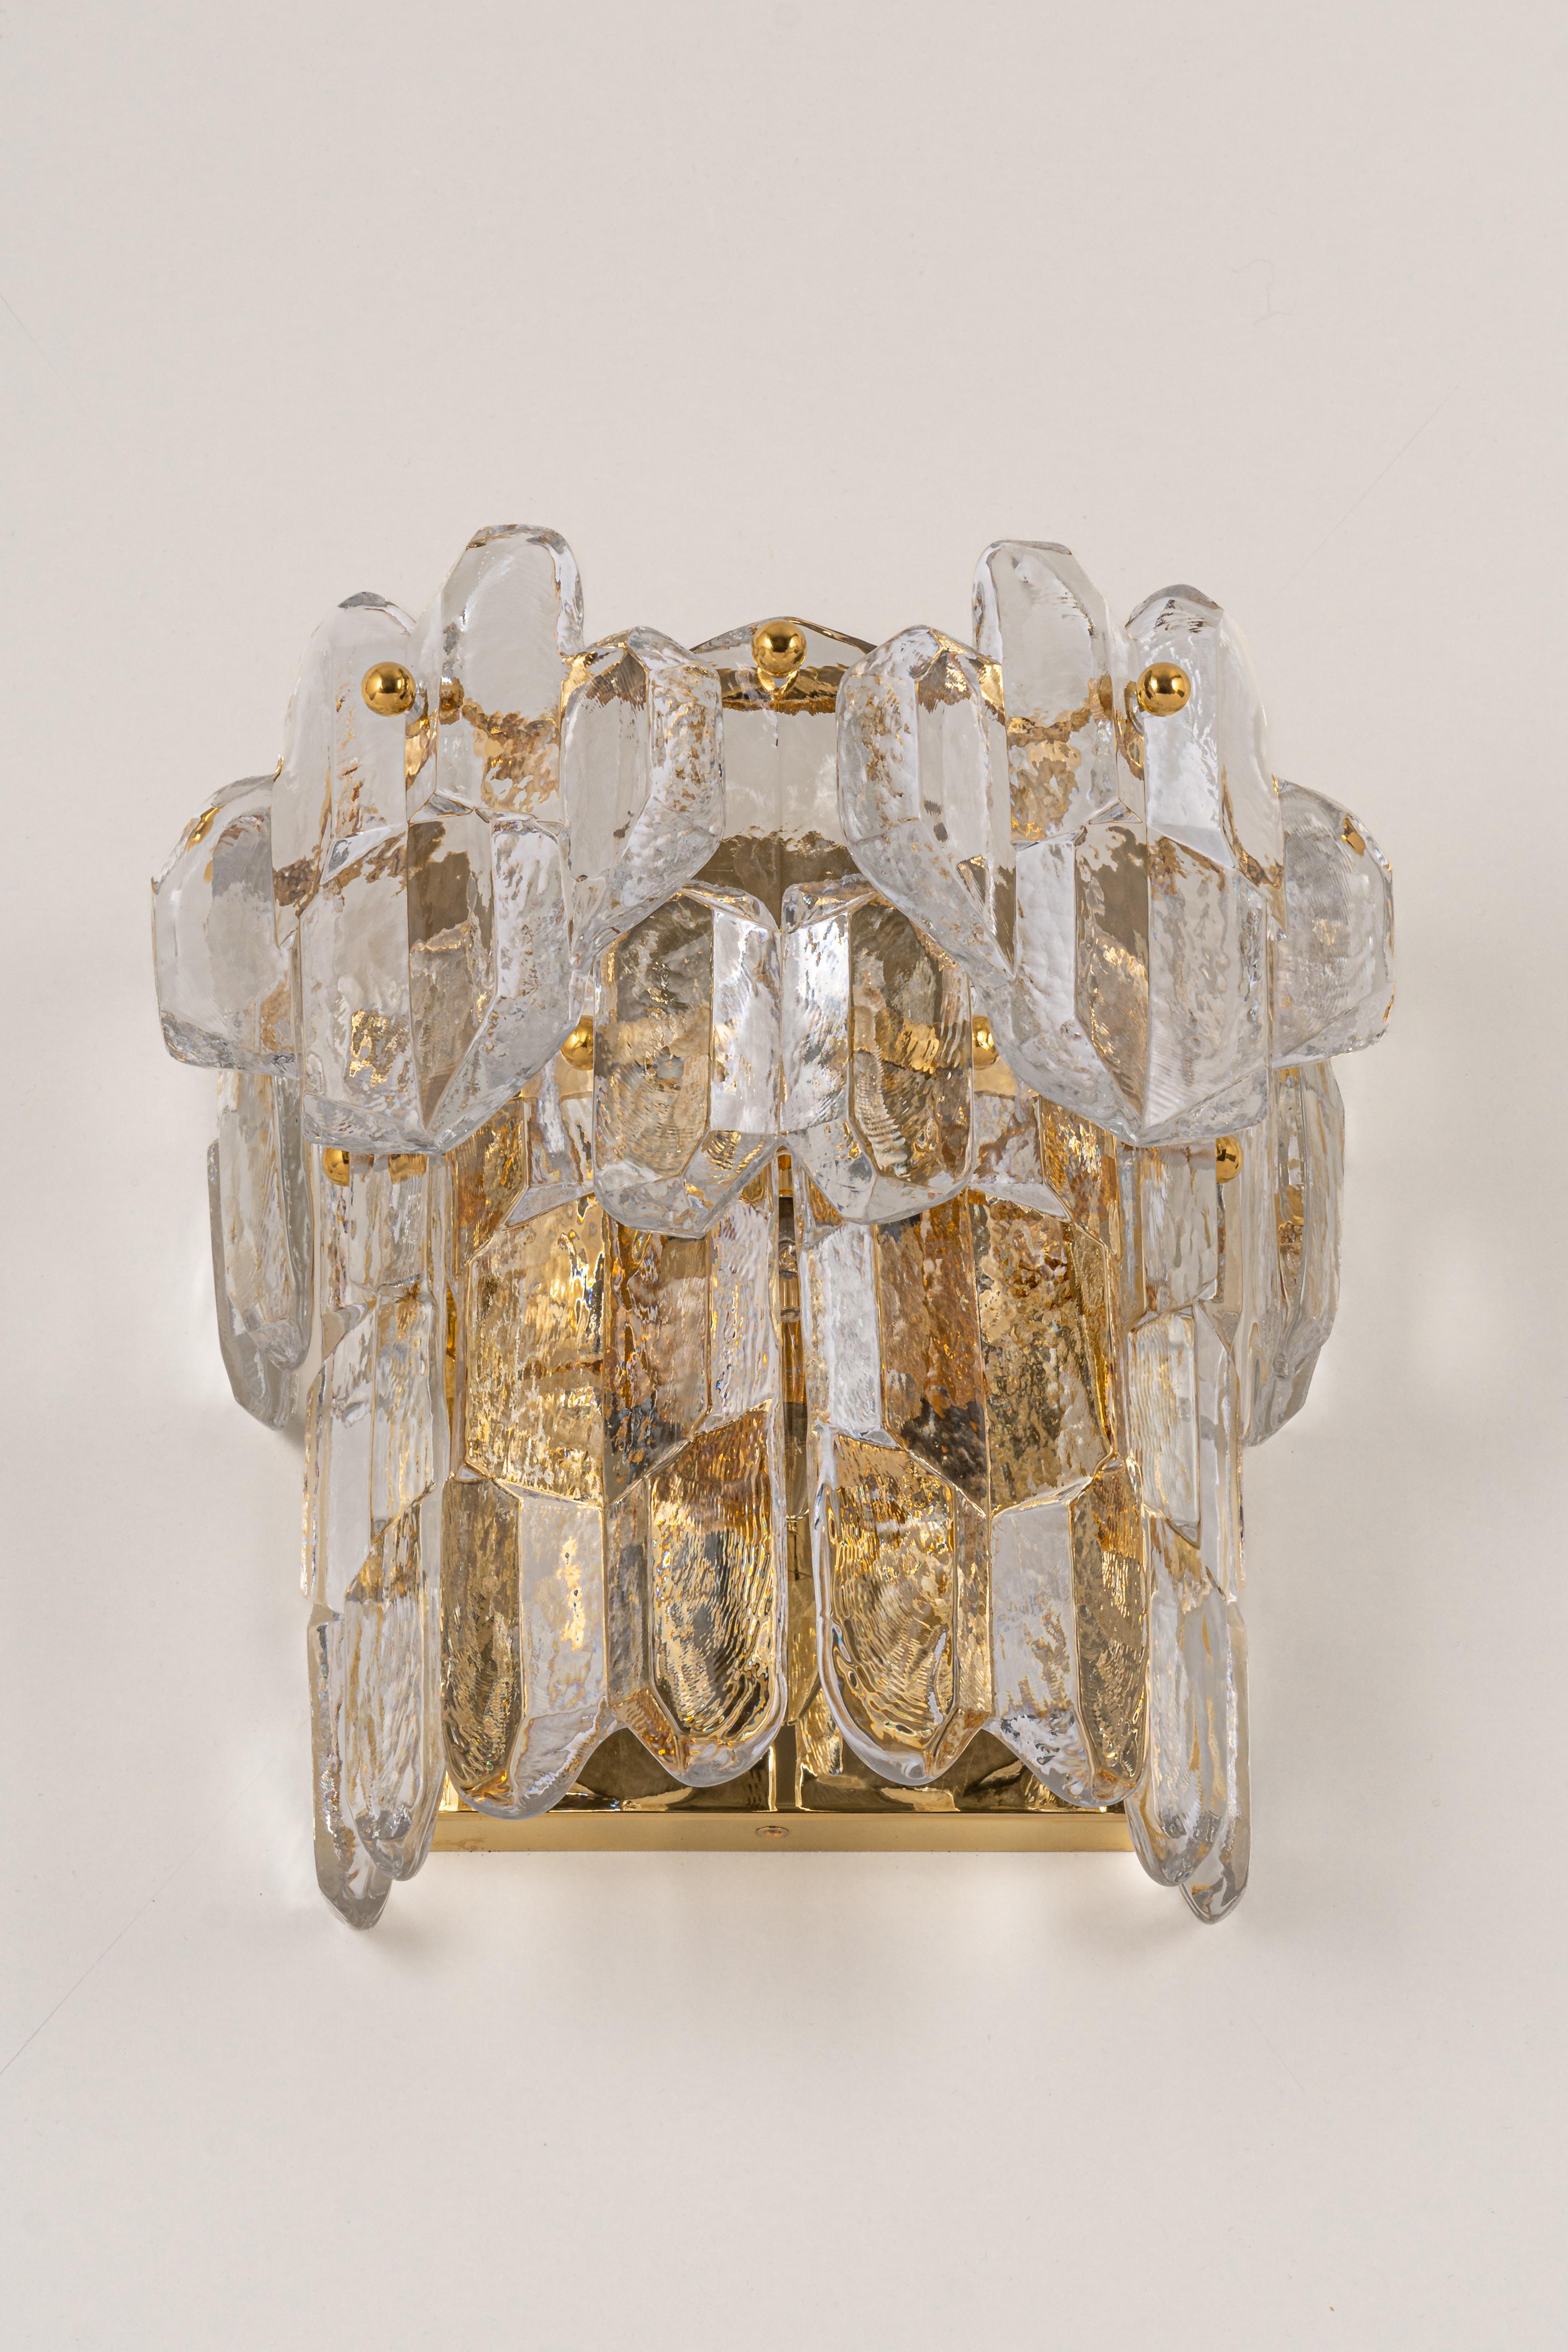 Austrian 1 of 2 Pairs of Large Kalmar Sconces Wall Lights 'Palazzo', Austria, 1970s For Sale